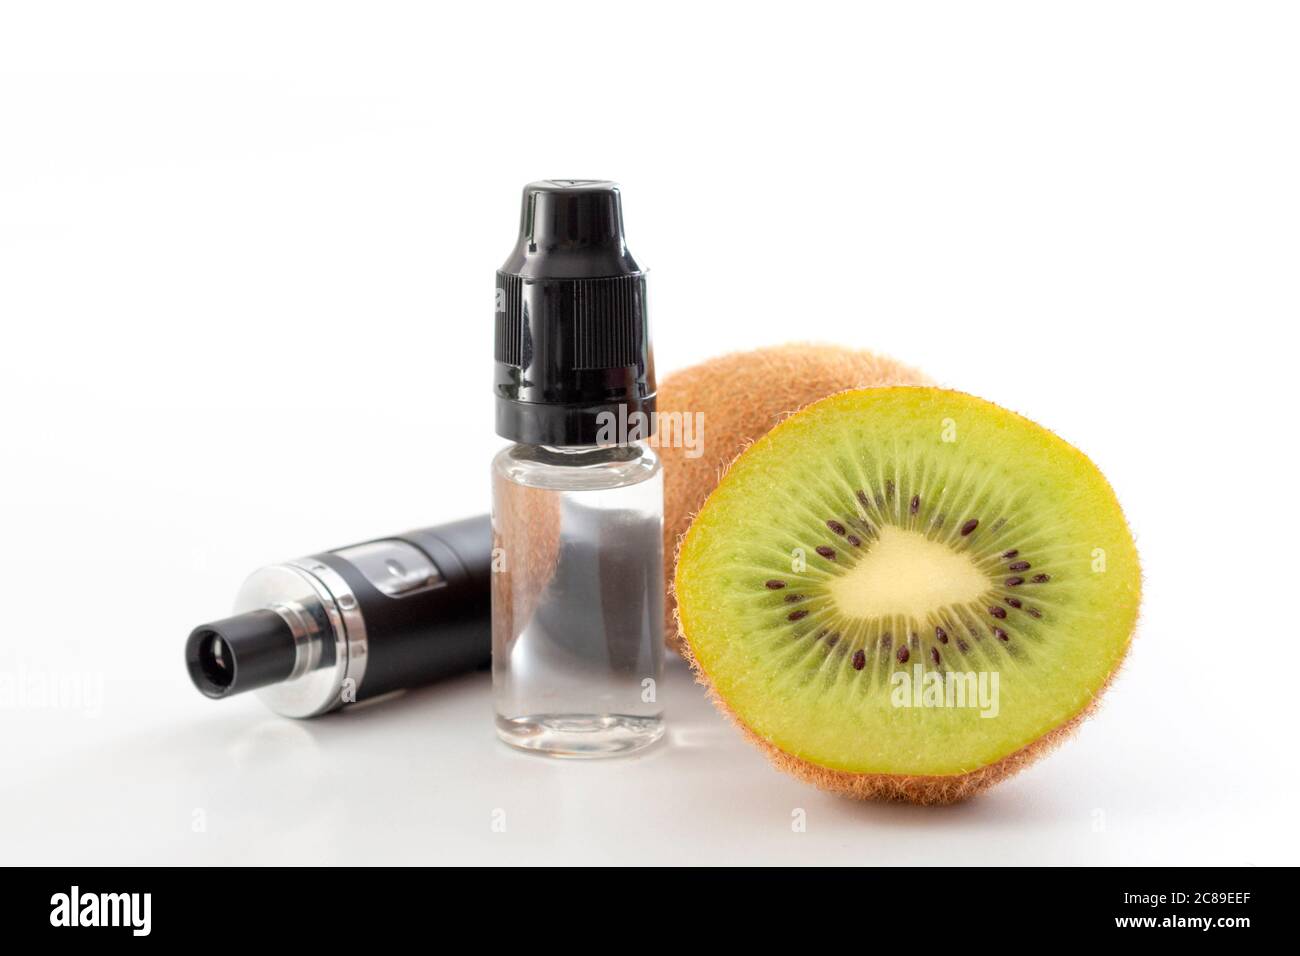 Safe alternative to smoking, vaping fruit flavour vapour conceptual idea with electronic cigarette and bottle of kiwi flavored juice isolated on white Stock Photo